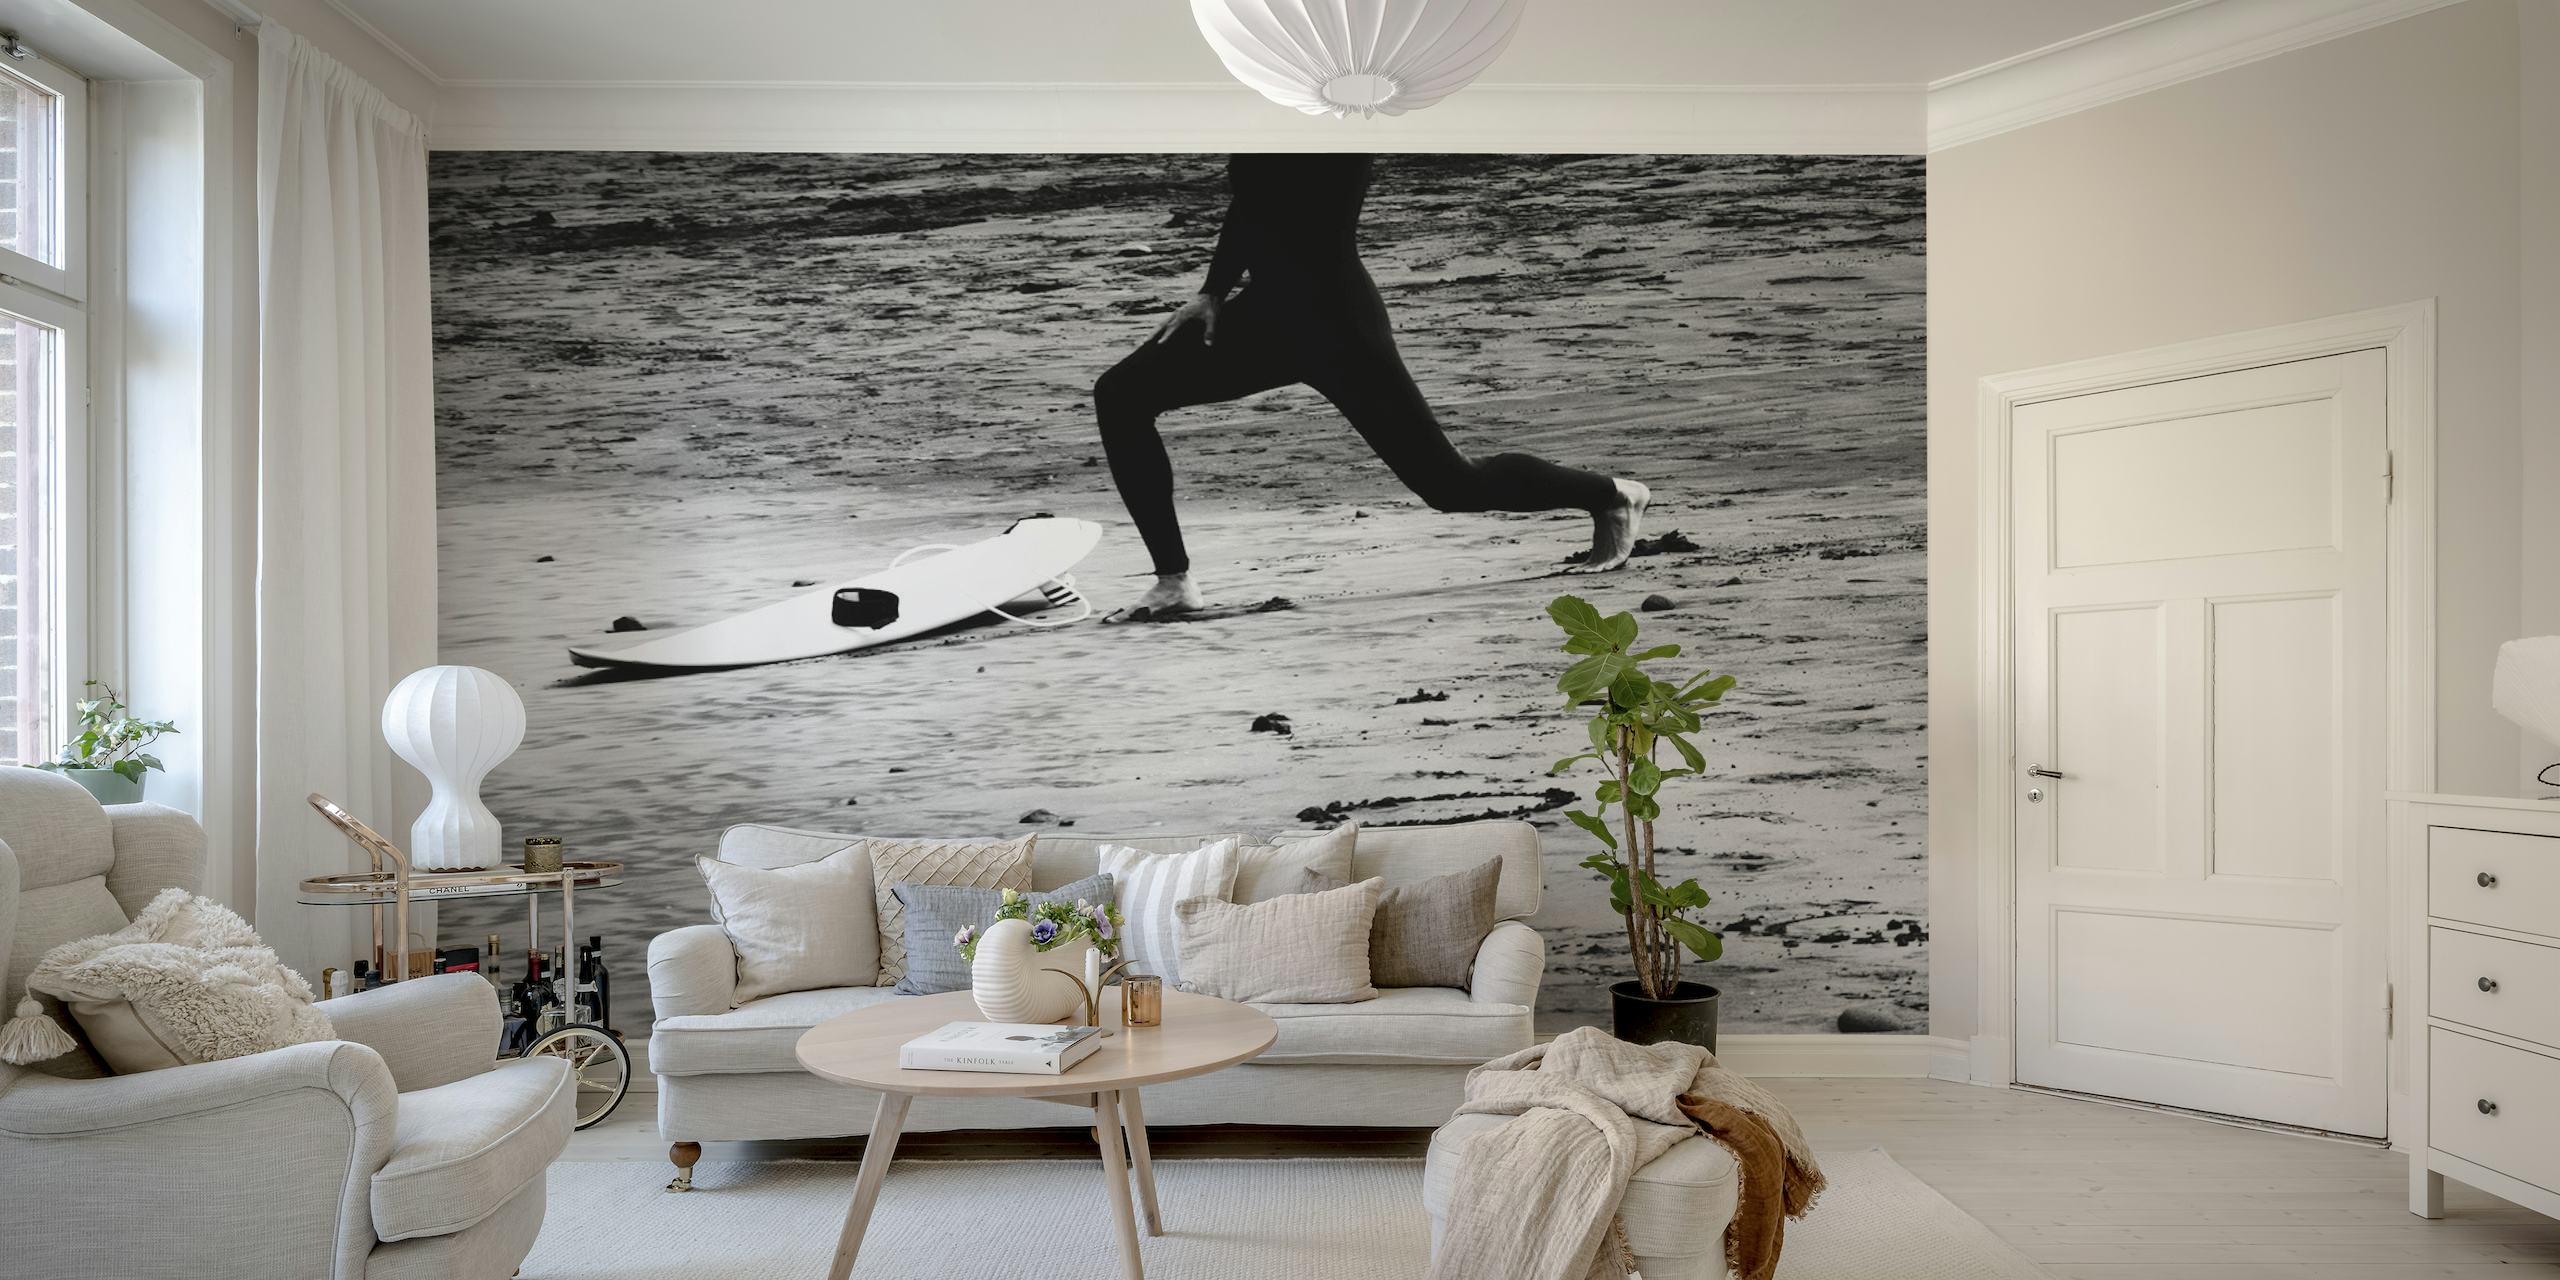 A black and white wall mural depicting the dynamic silhouette of a surfer with their board on the beach.